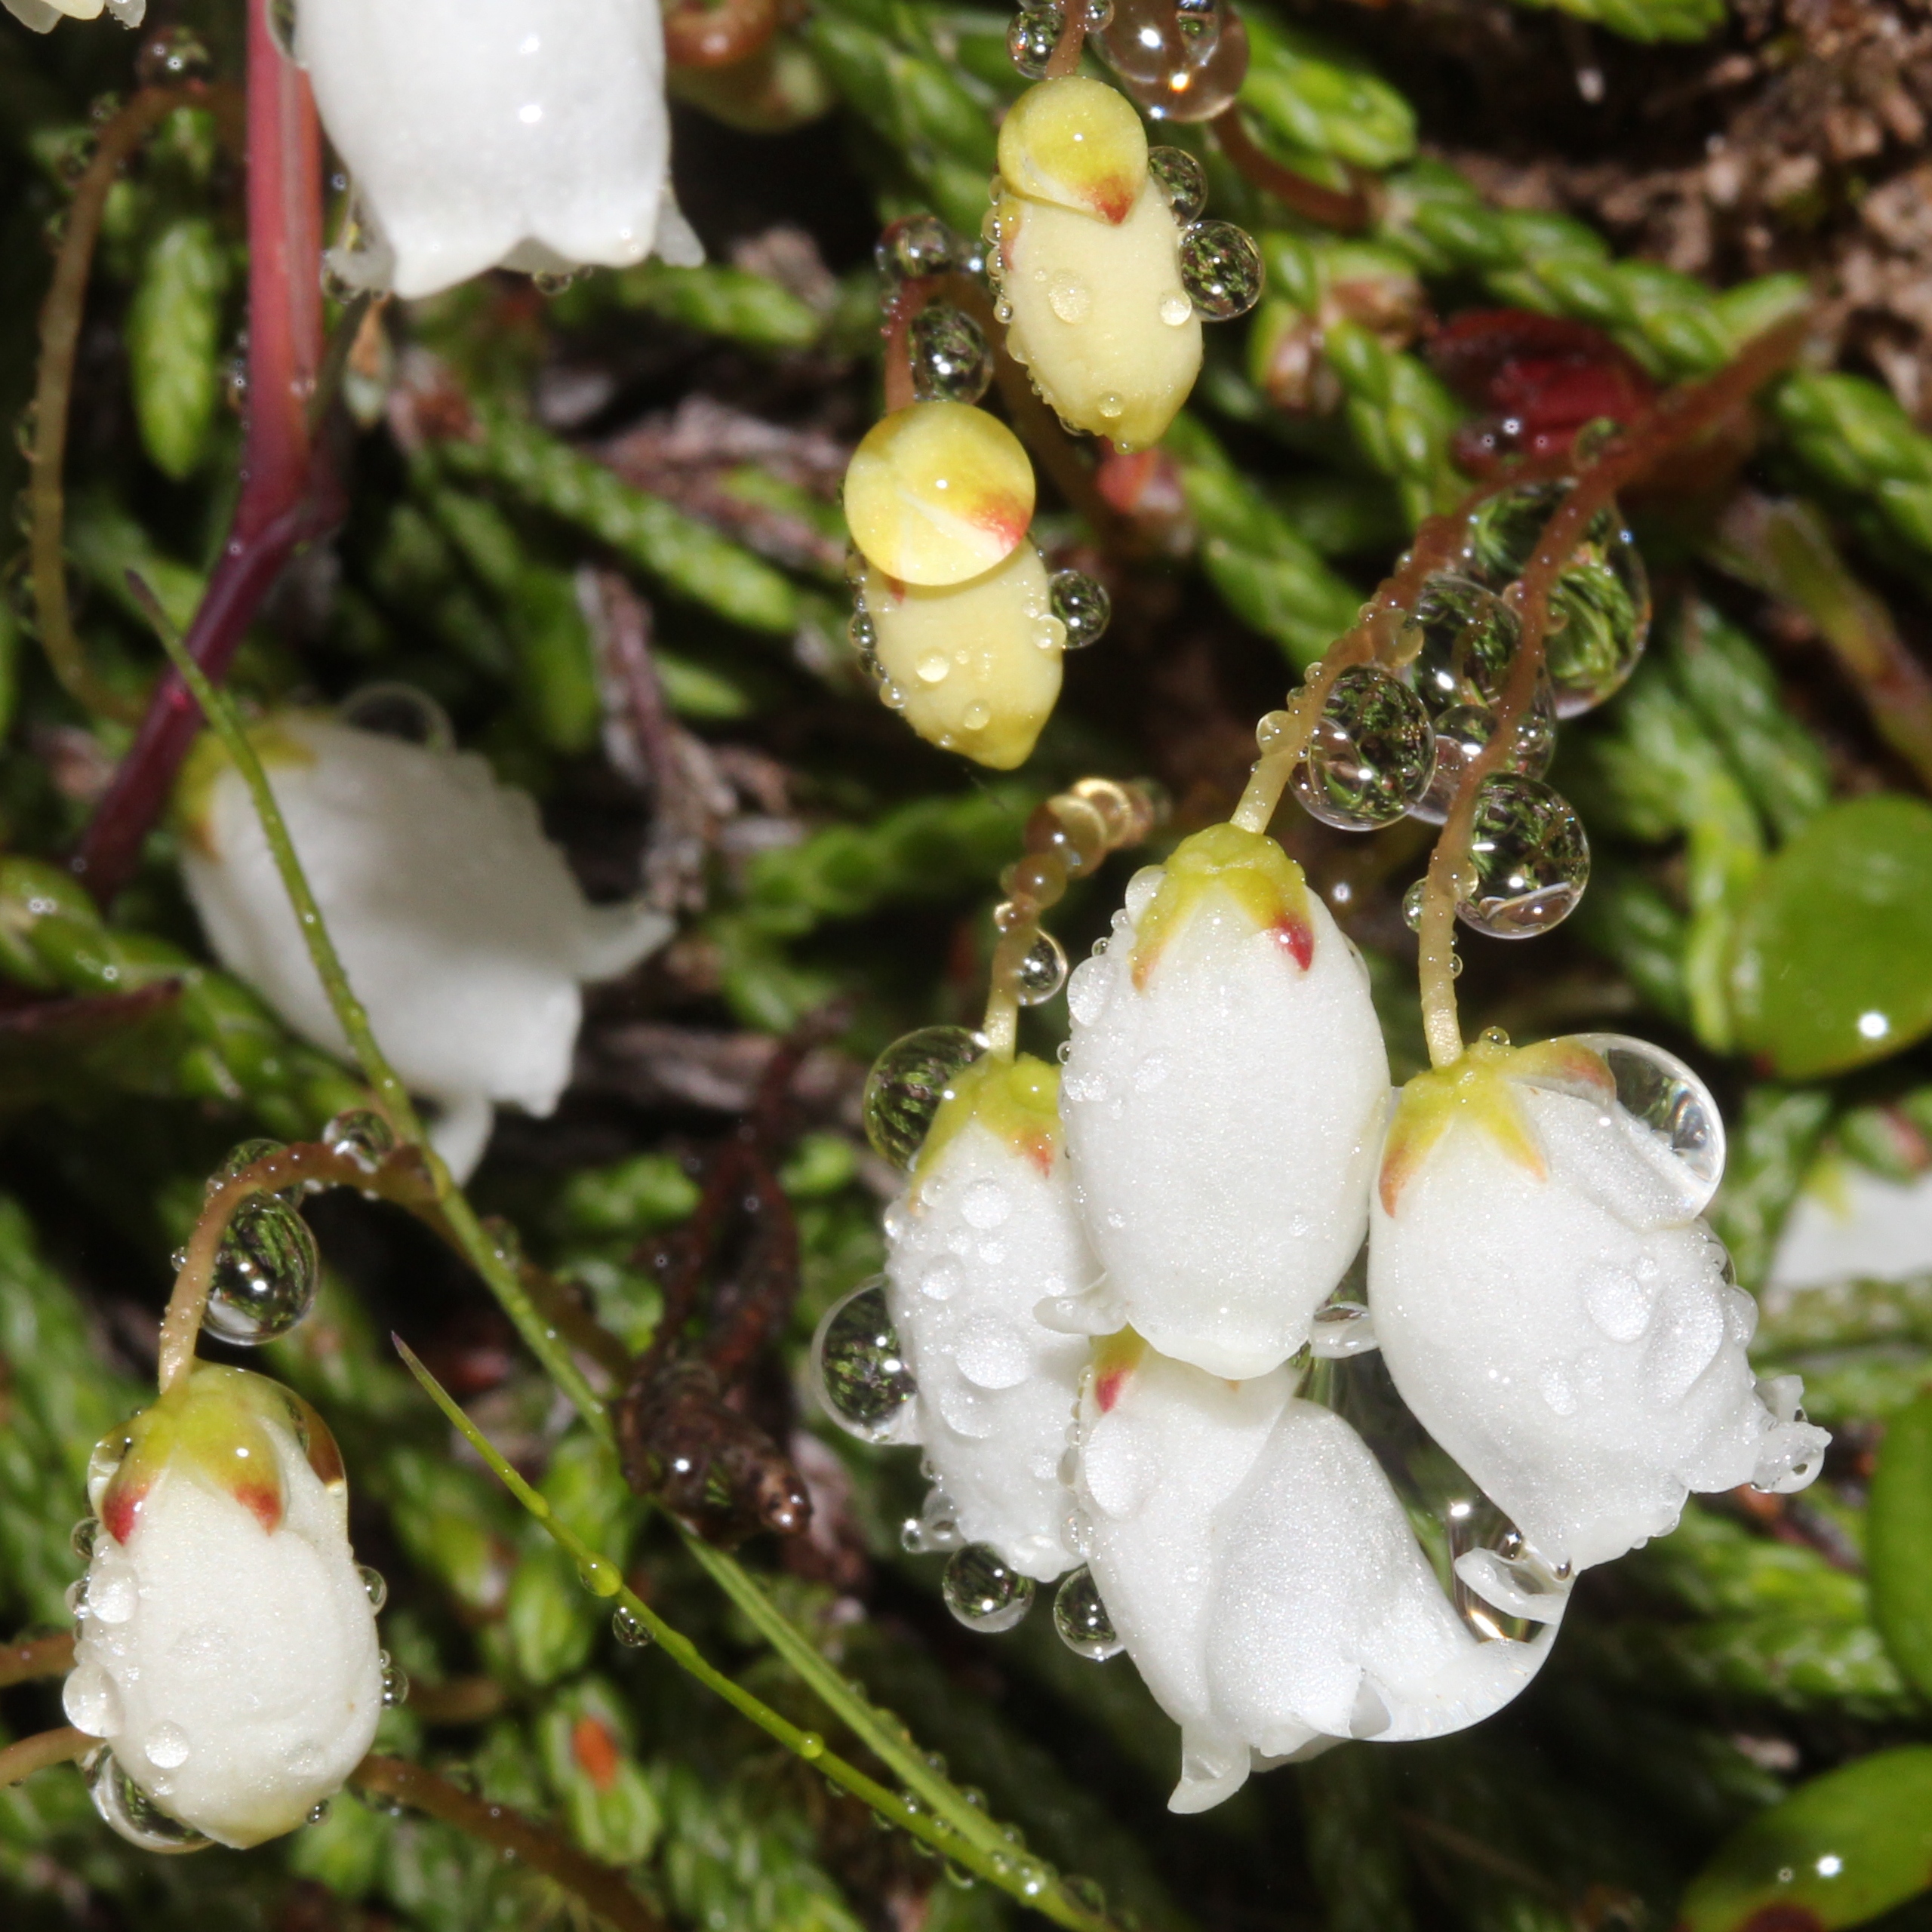 Cassiope lycopodioides (with Water droplets)